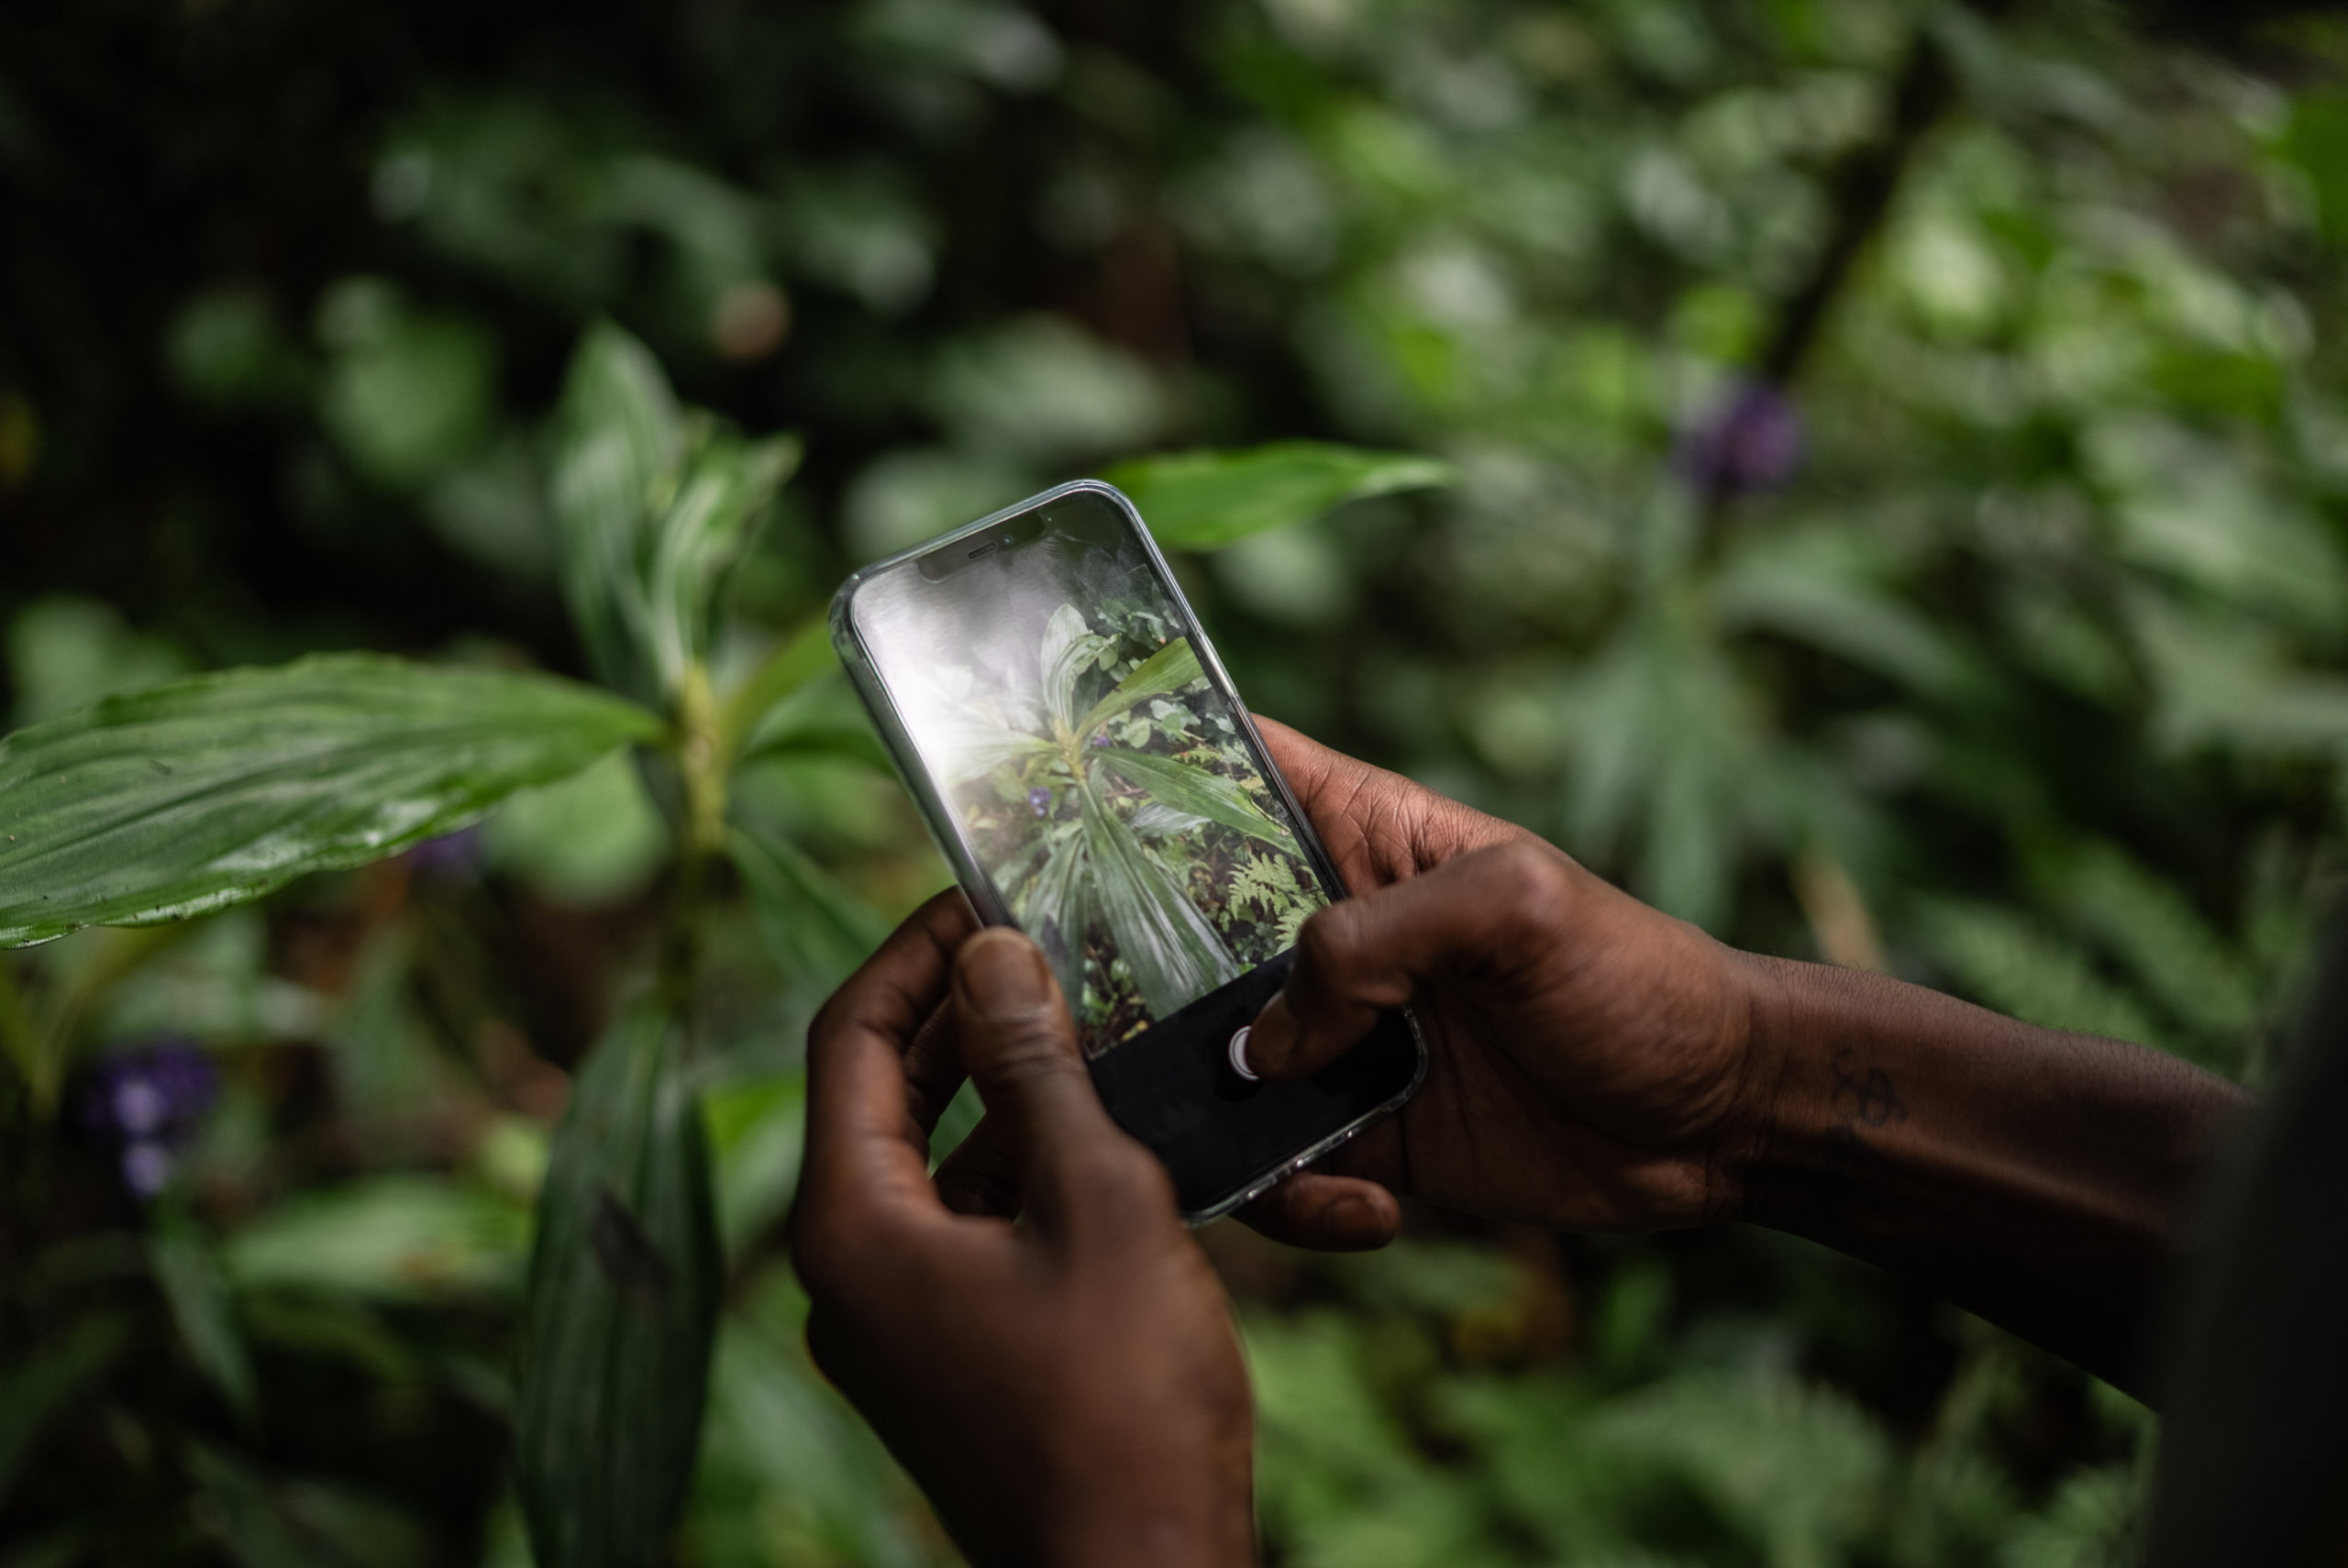 A person holding a smartphone takes a photo of plants in a lush green environment for ClimateTech purposes.